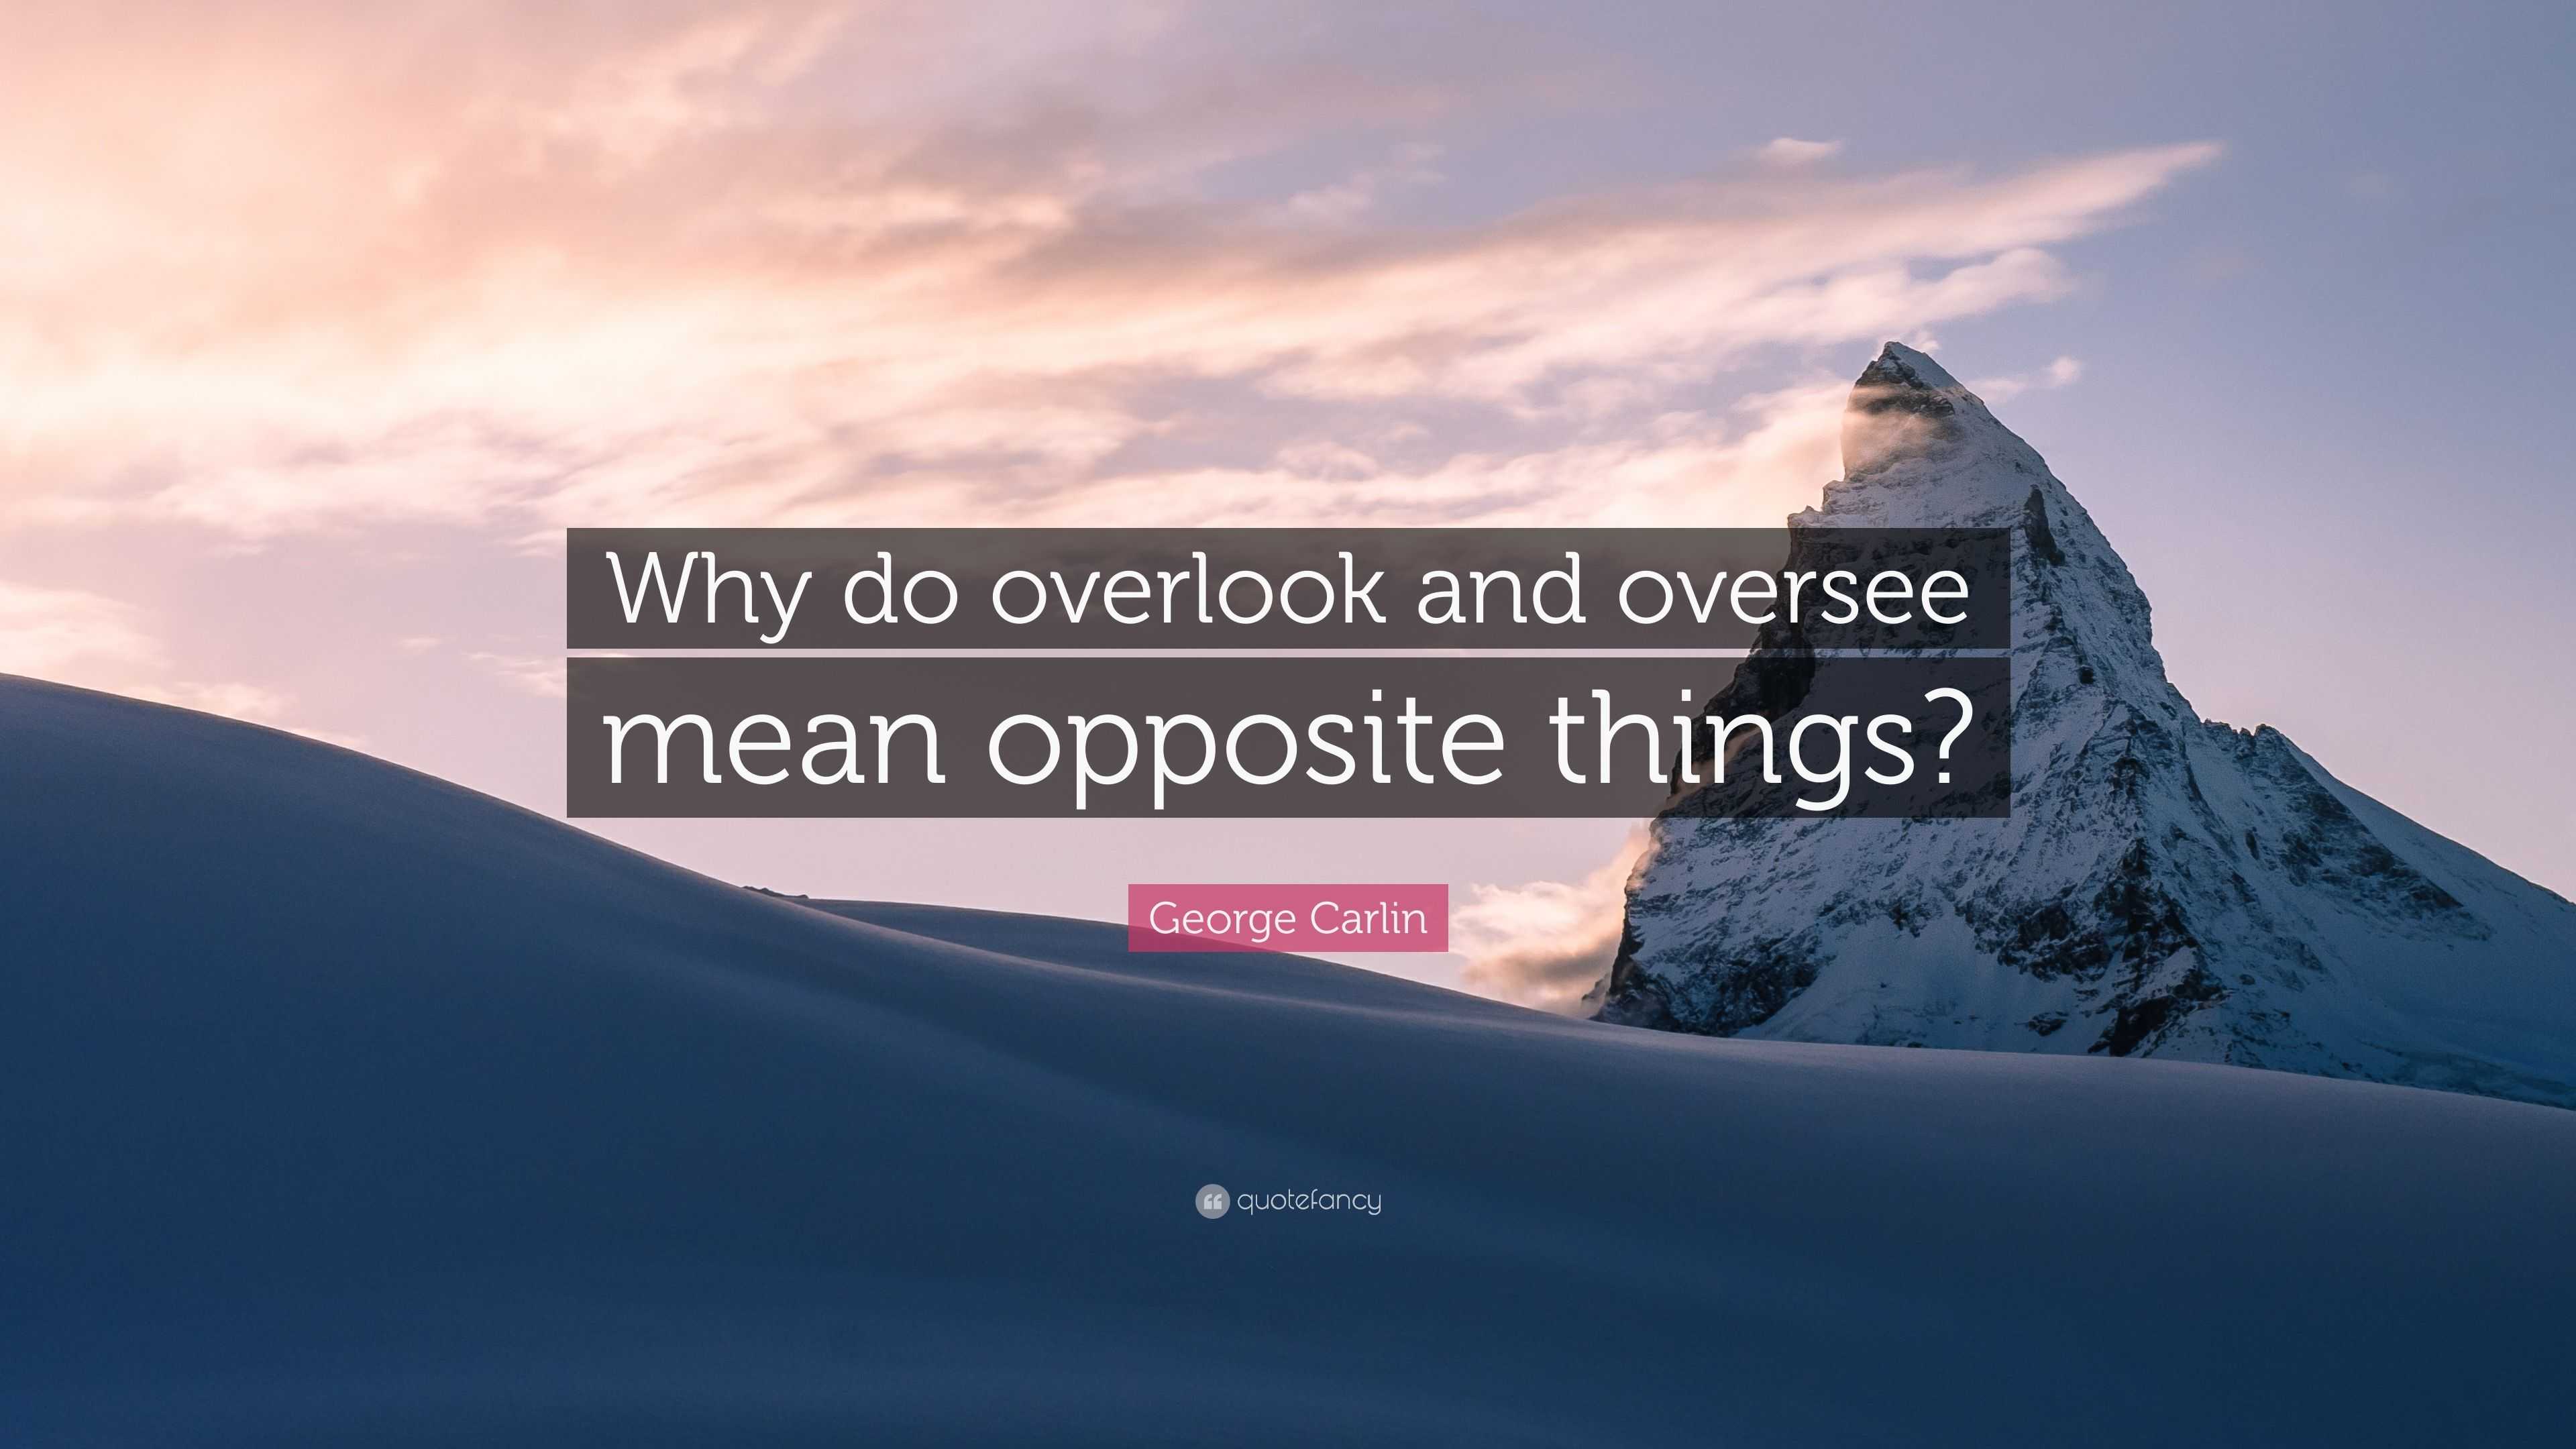 Overlook meaning